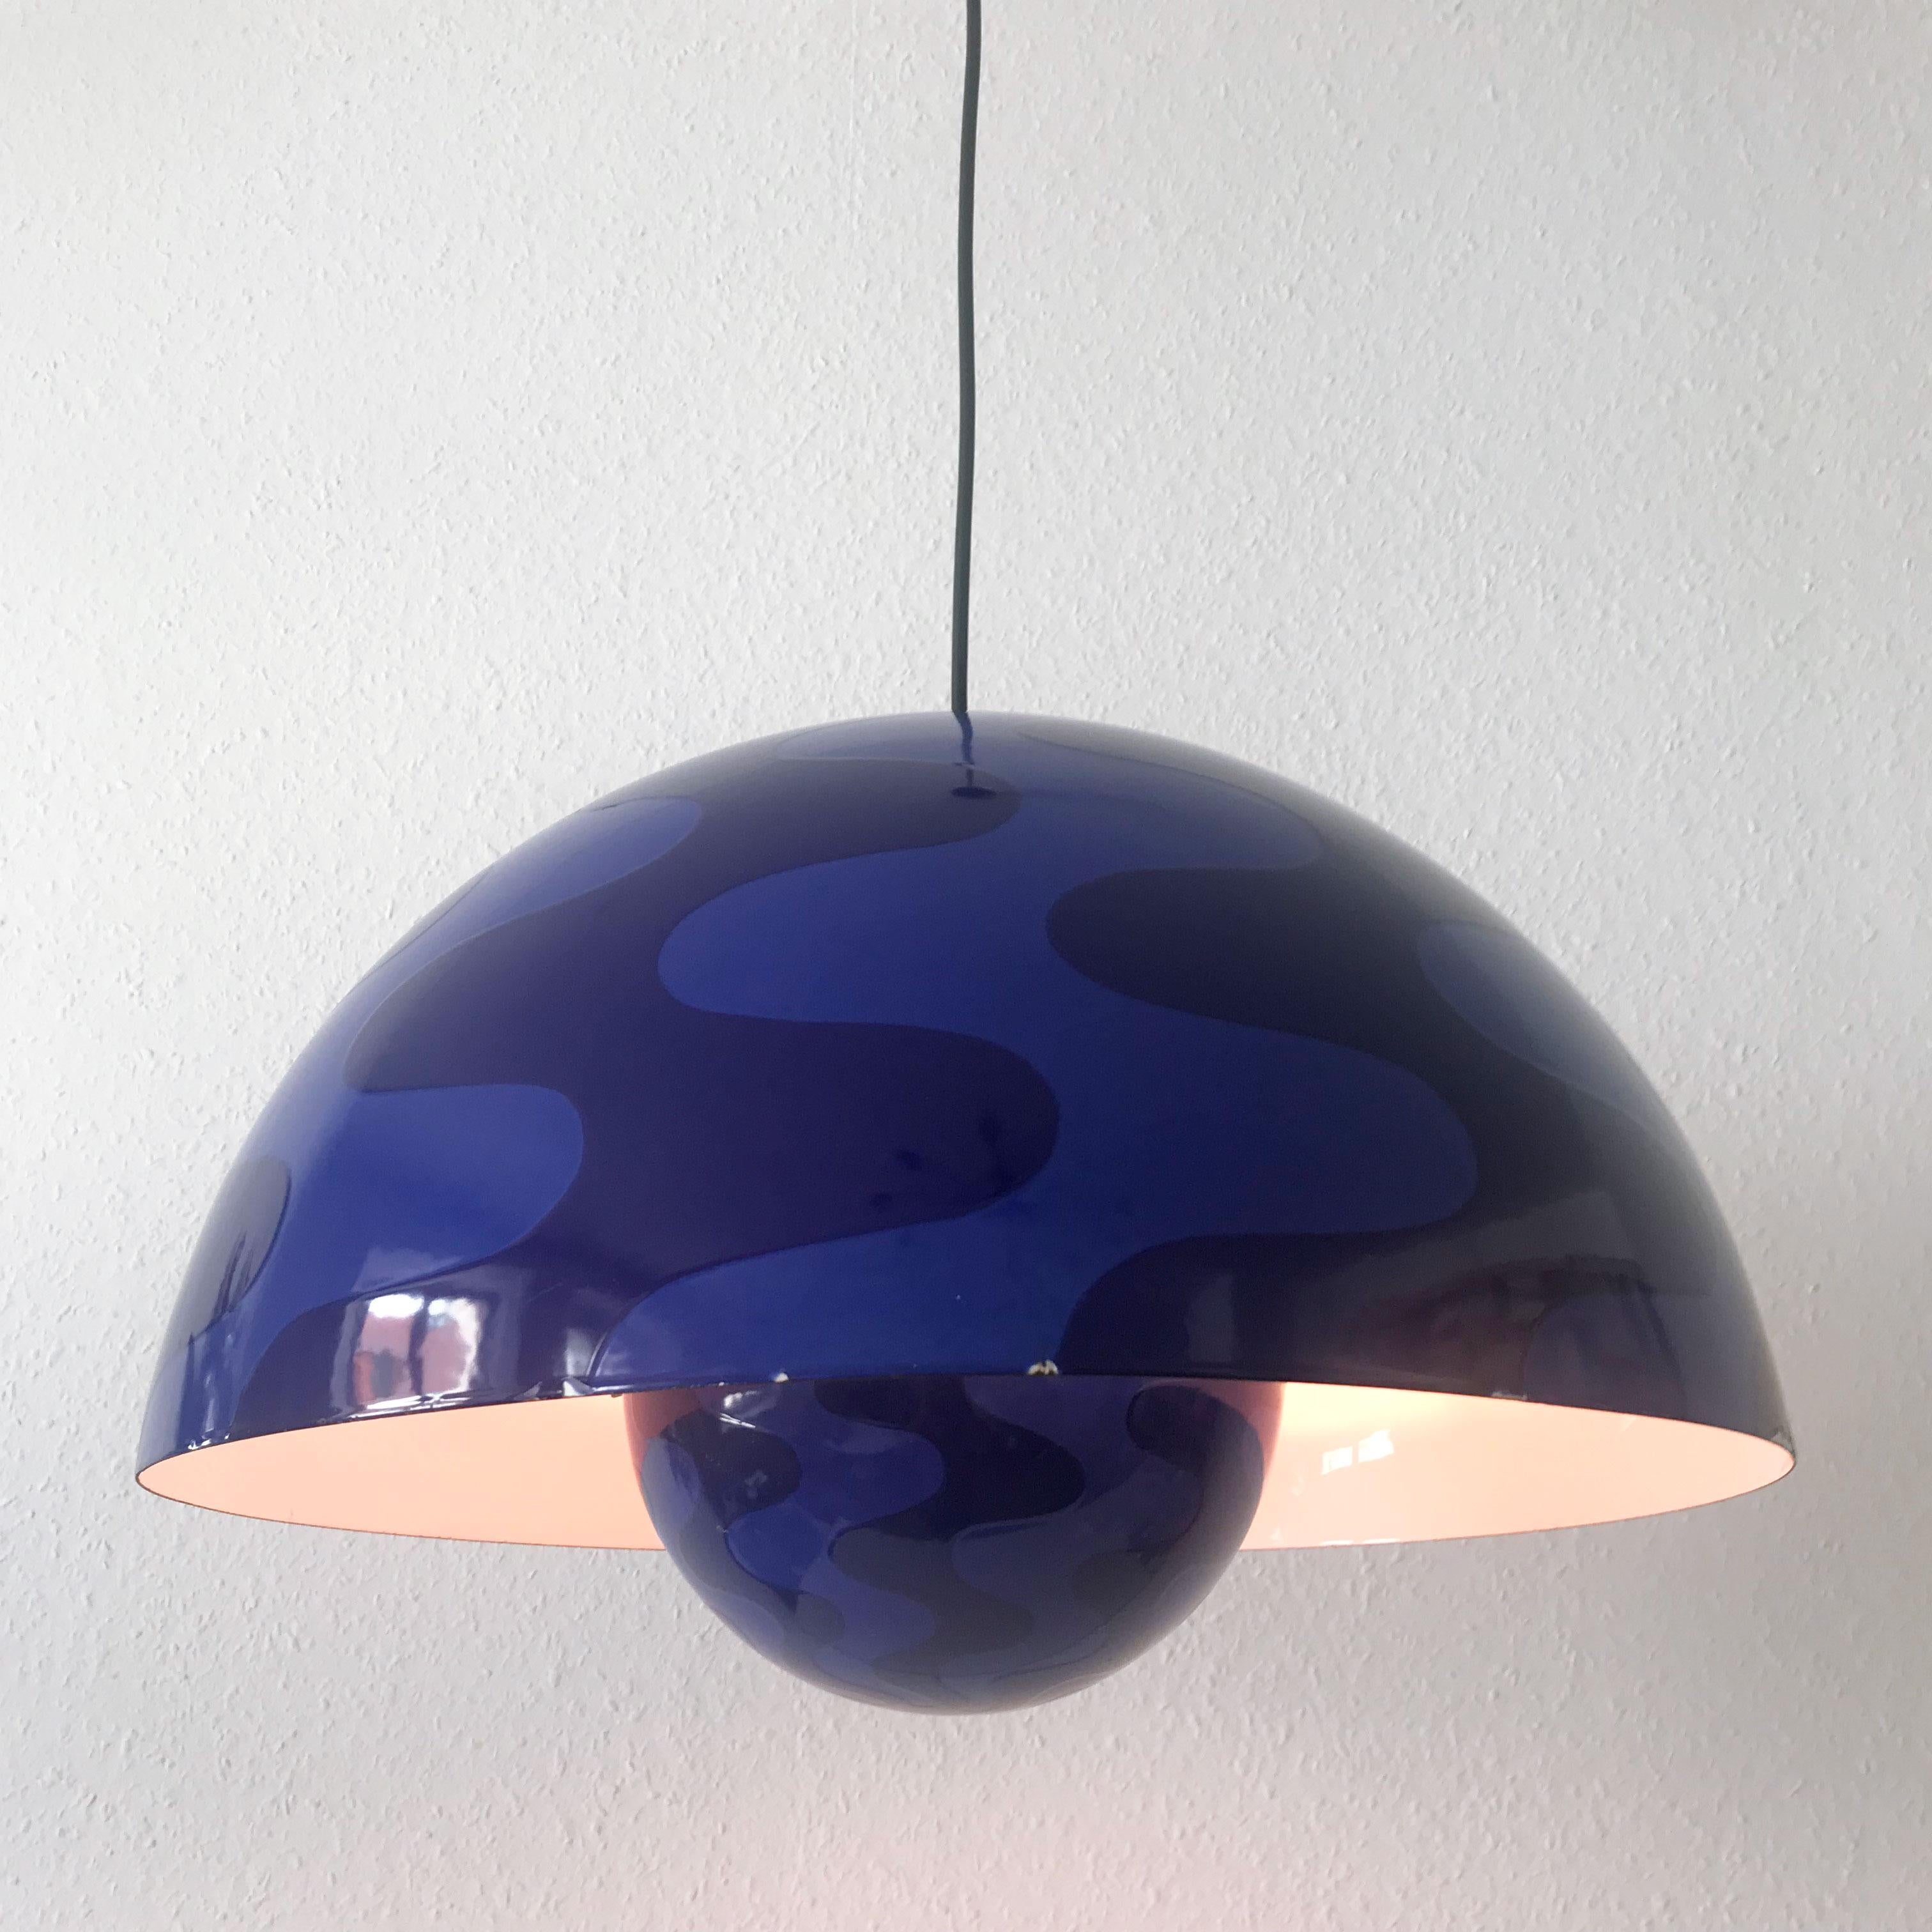 Mid-Century Modern Rare and Large Flower Pot Pendant Lamp by Verner Panton for Louis Poulsen 1971 For Sale